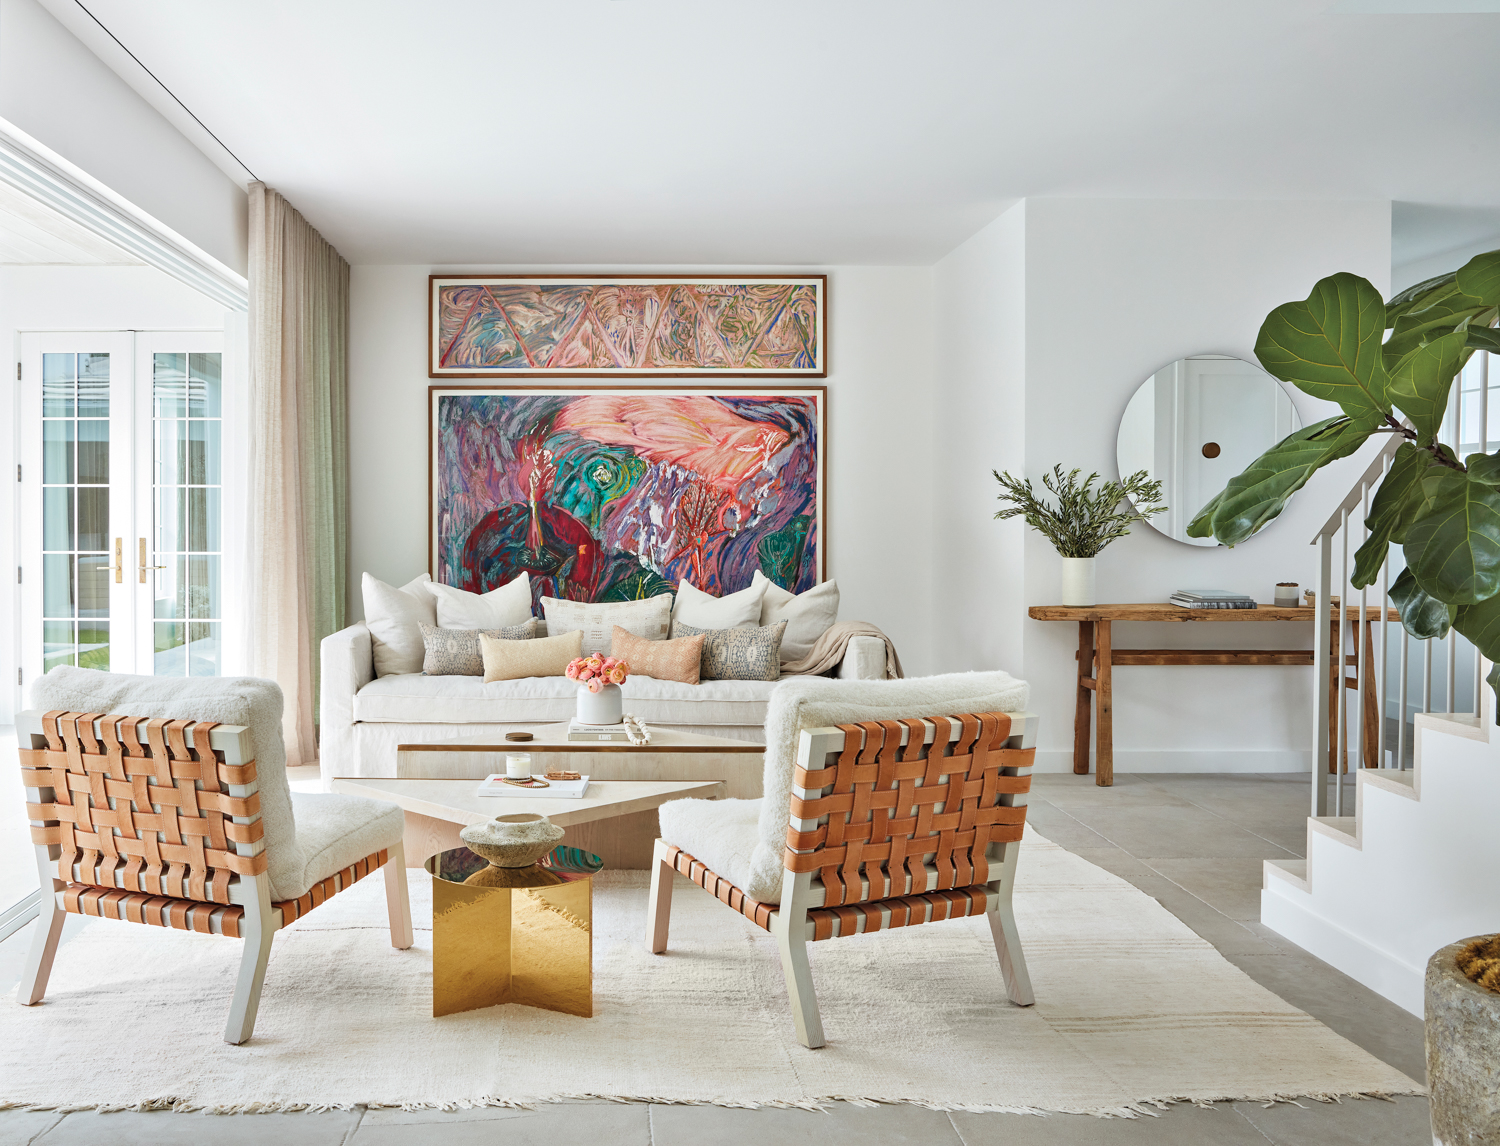 A Palm Beach Home Embraces Southern California’s Laid-Back Style